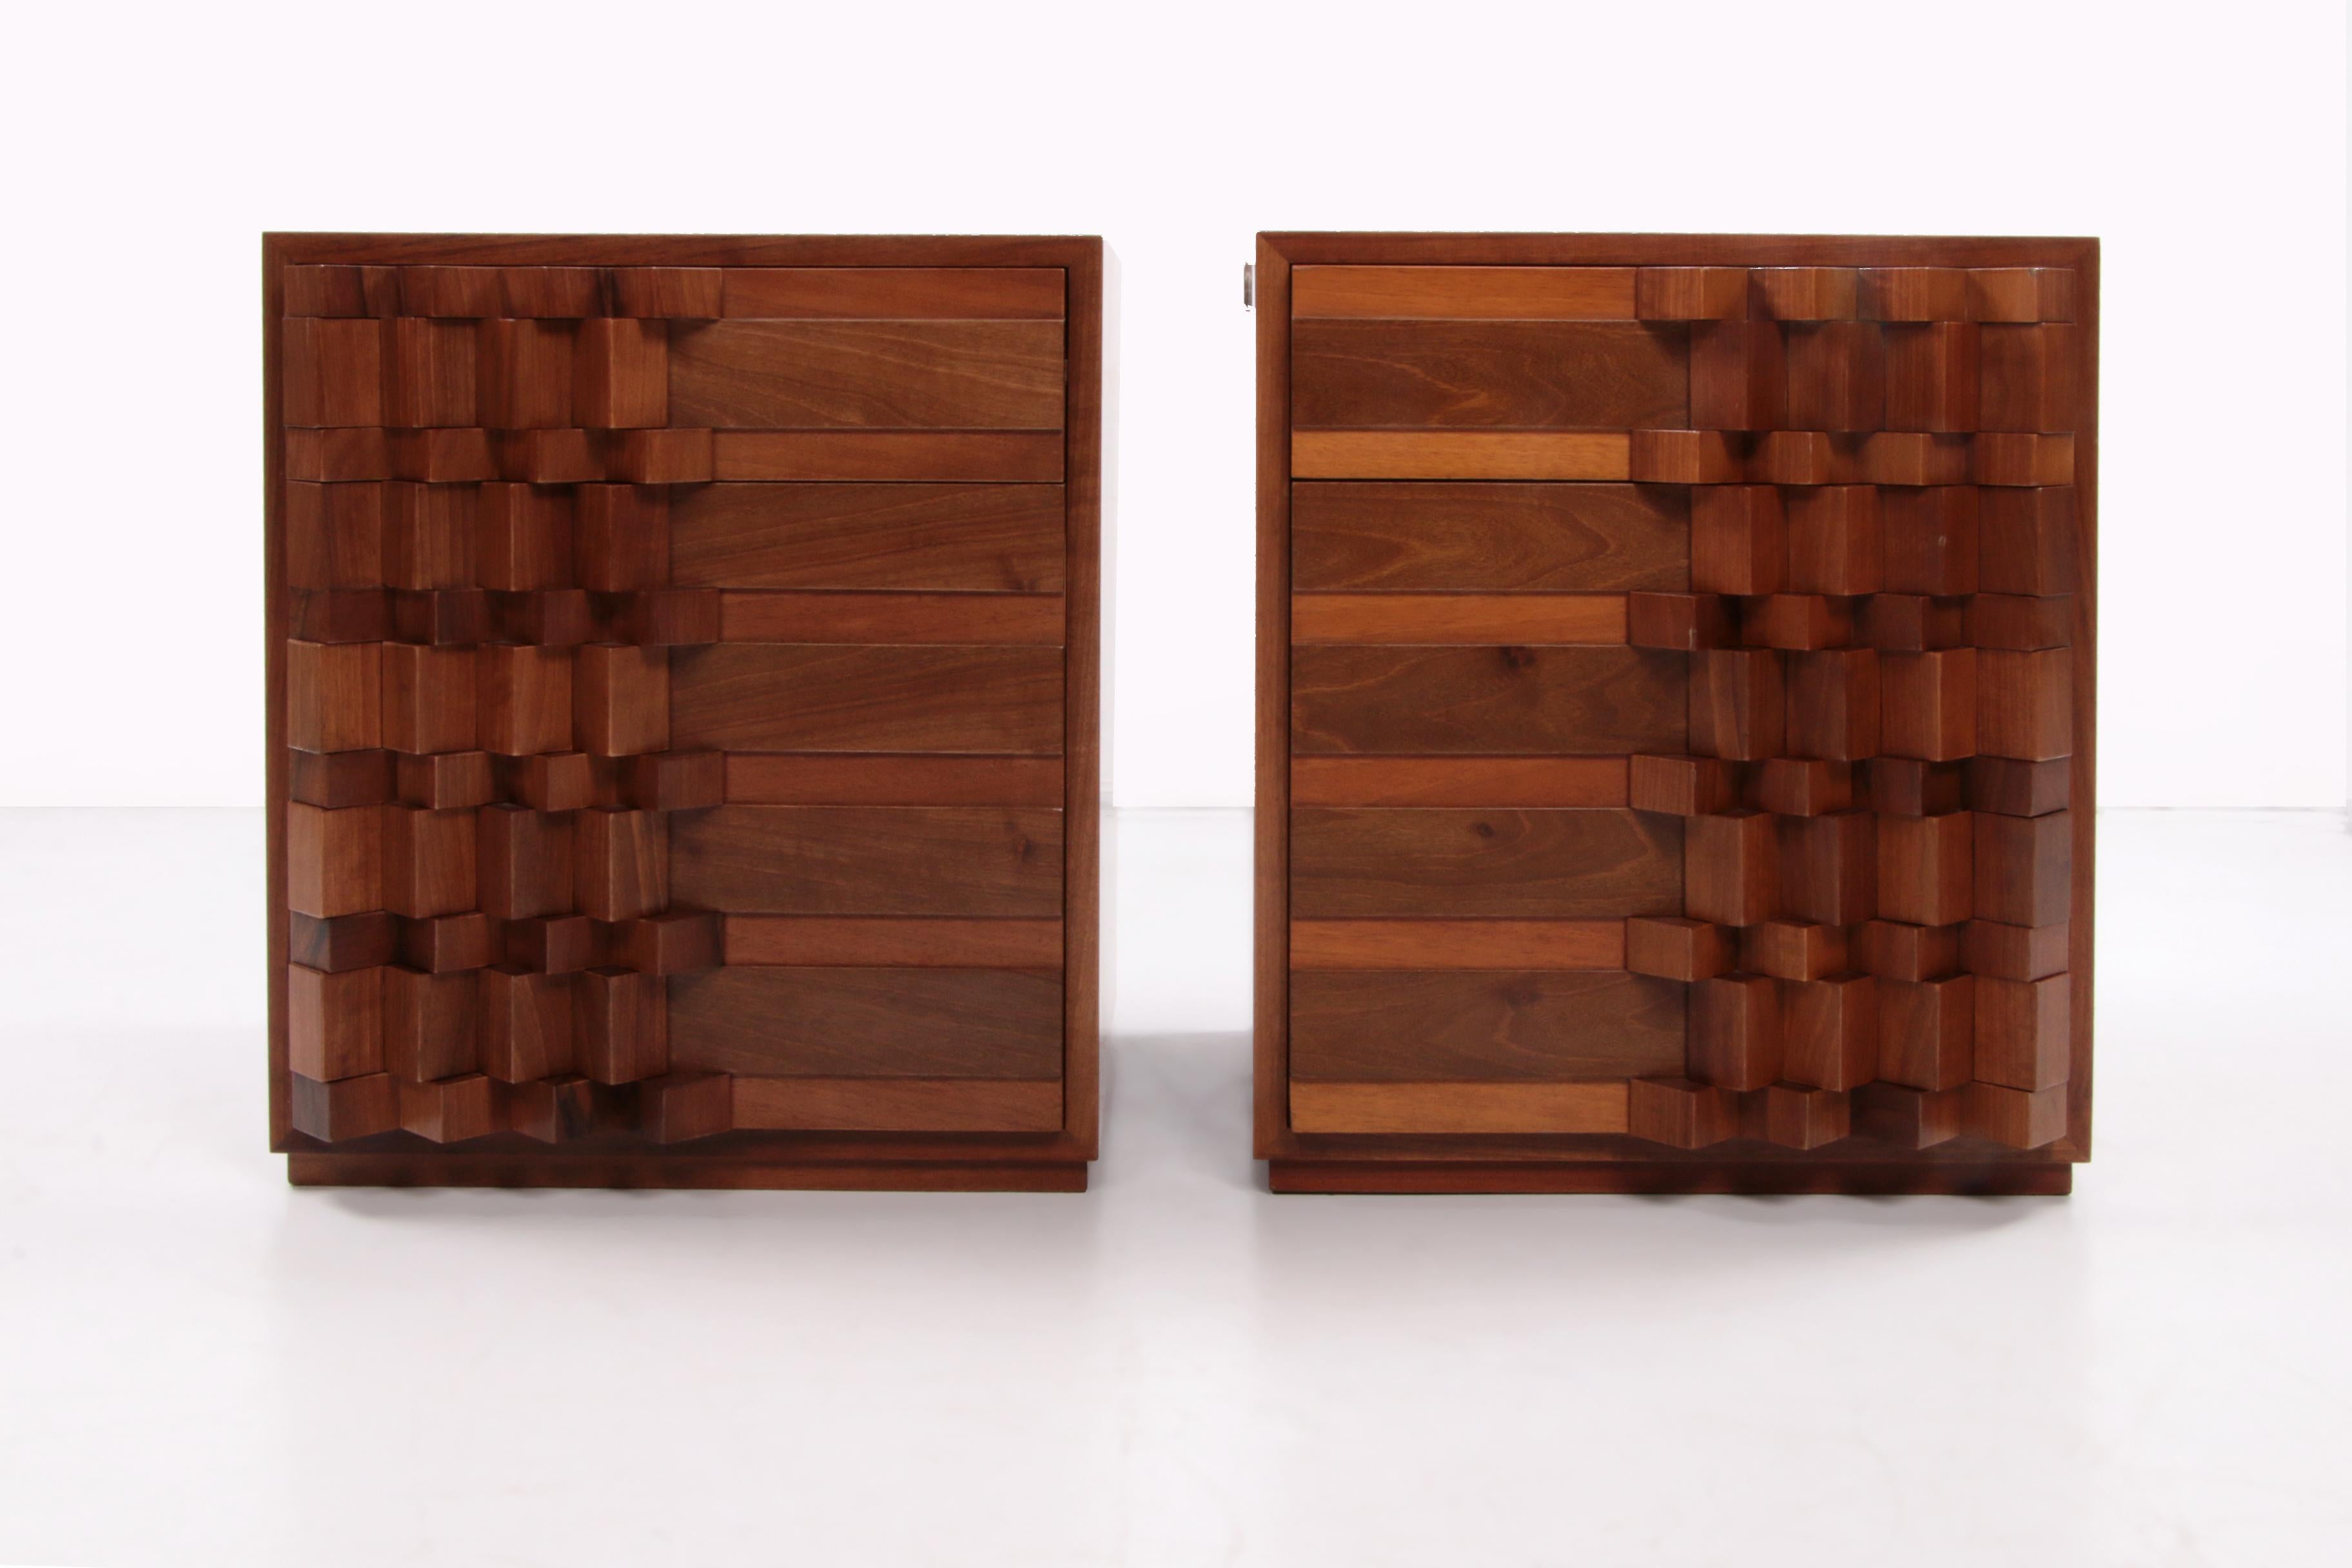 Vintage Luciano Frigerio Bedside Tables with Graphic Doors, 1970s Italy. For Sale 1